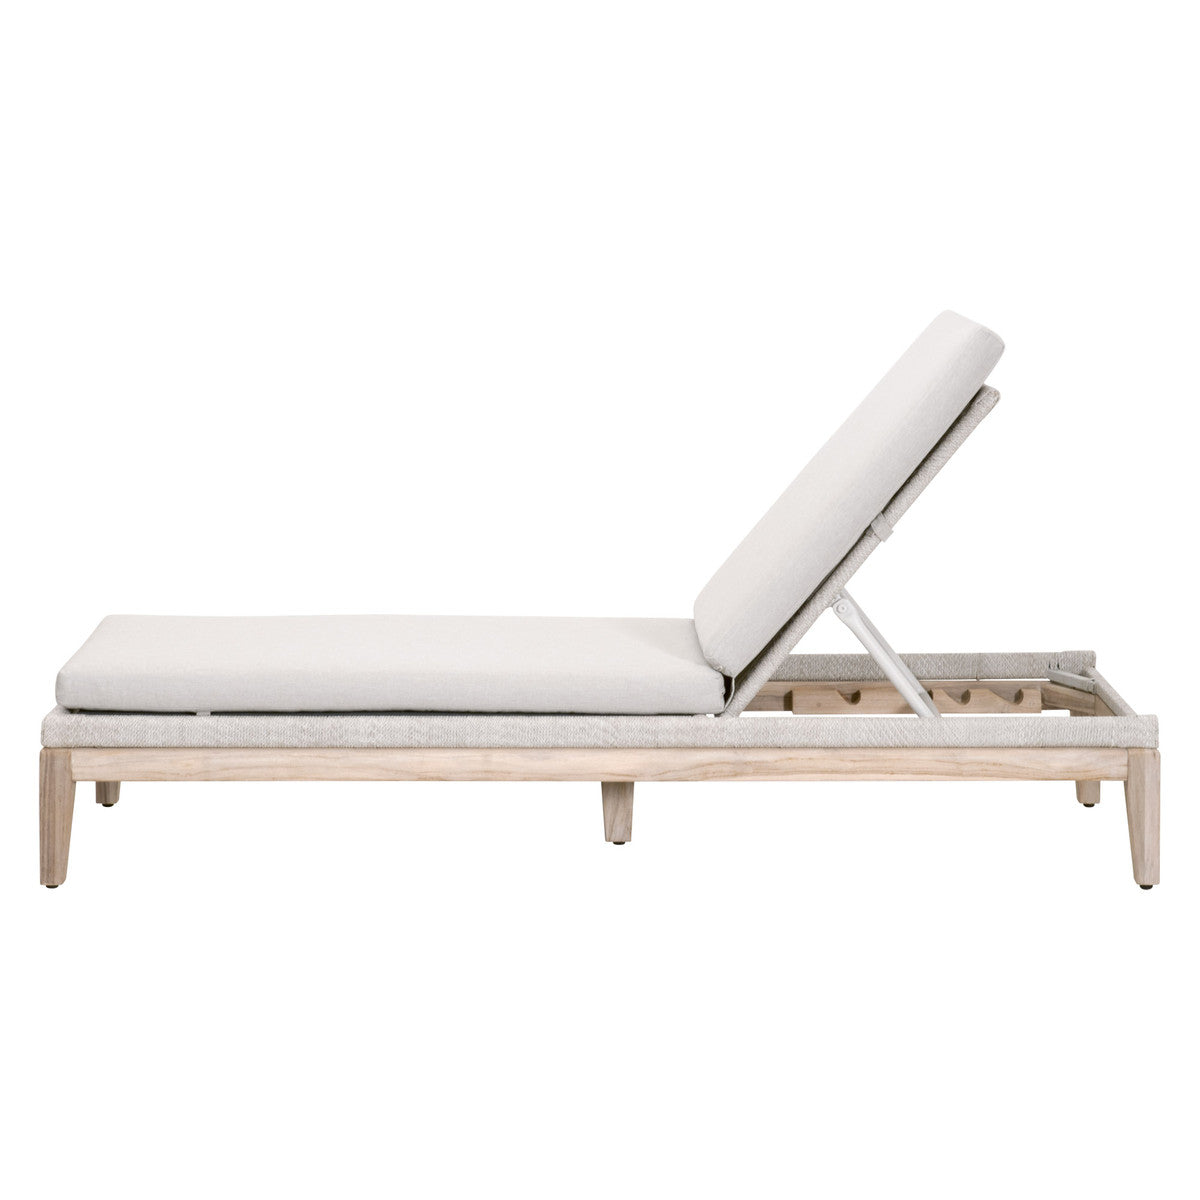 Hali Outdoor Chaise Lounge